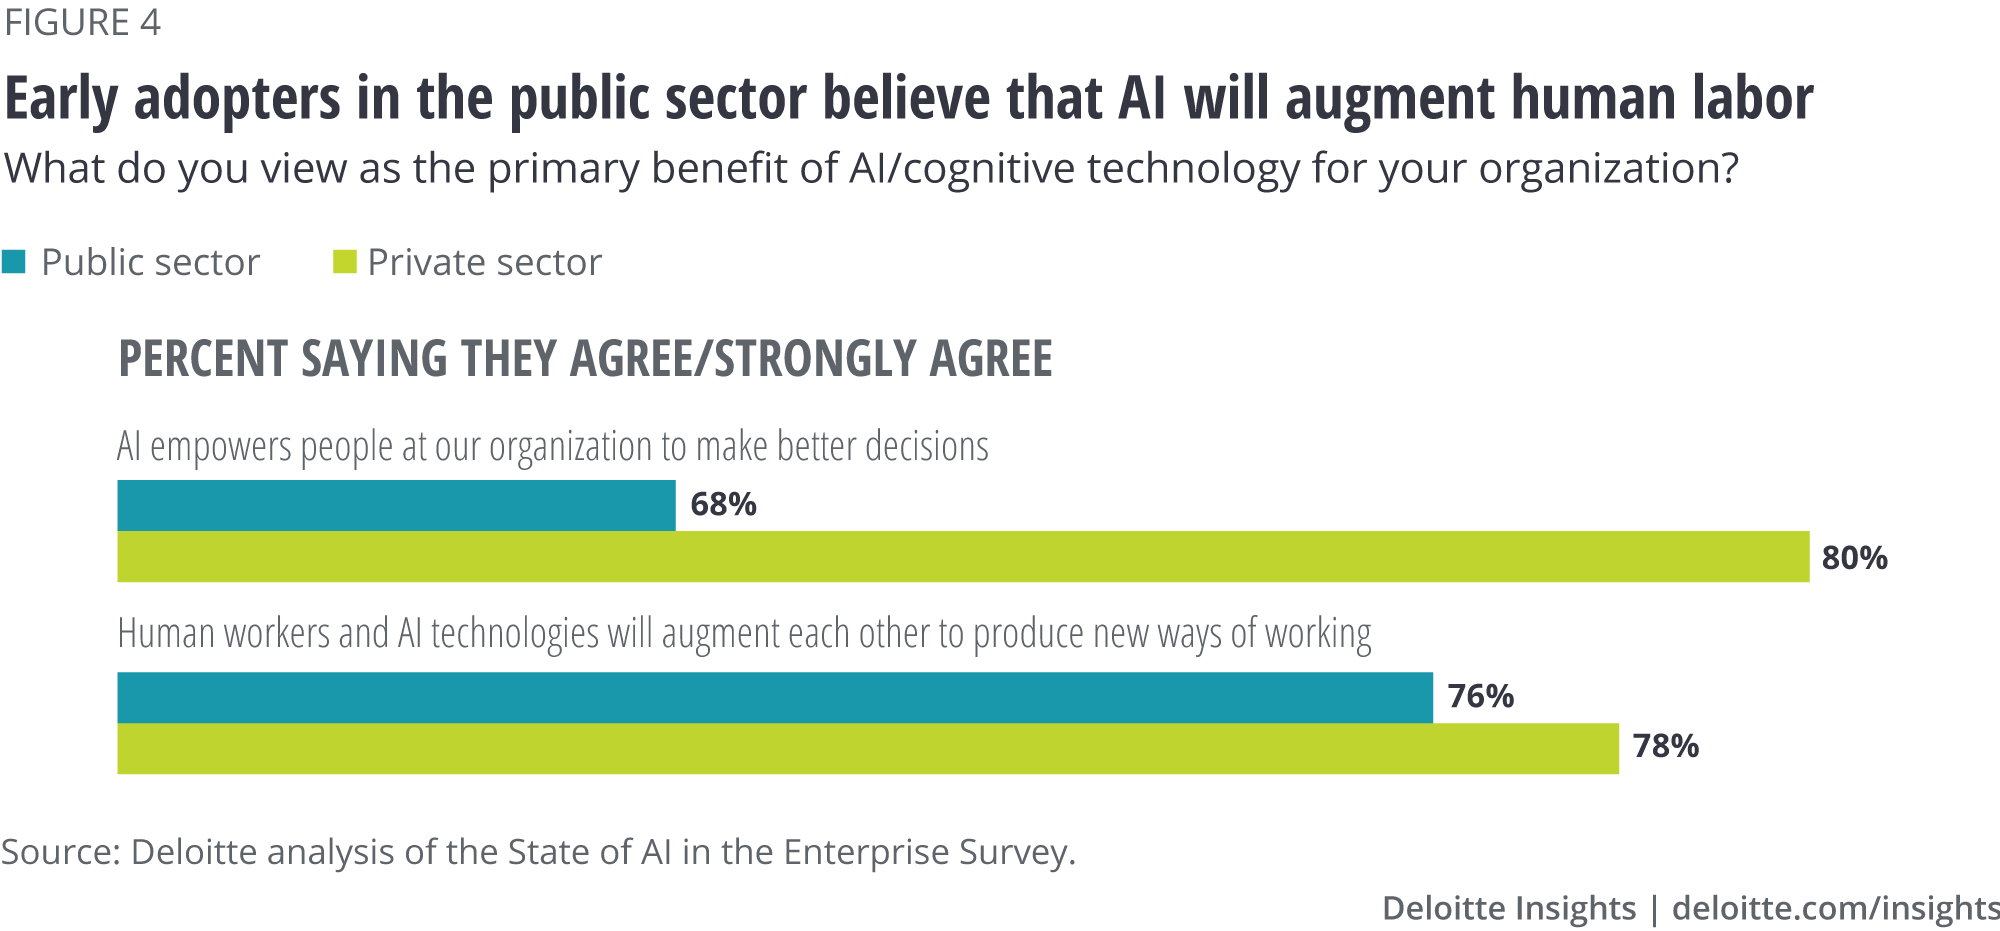 Early adopters in the public sector believe that AI will augment human labor